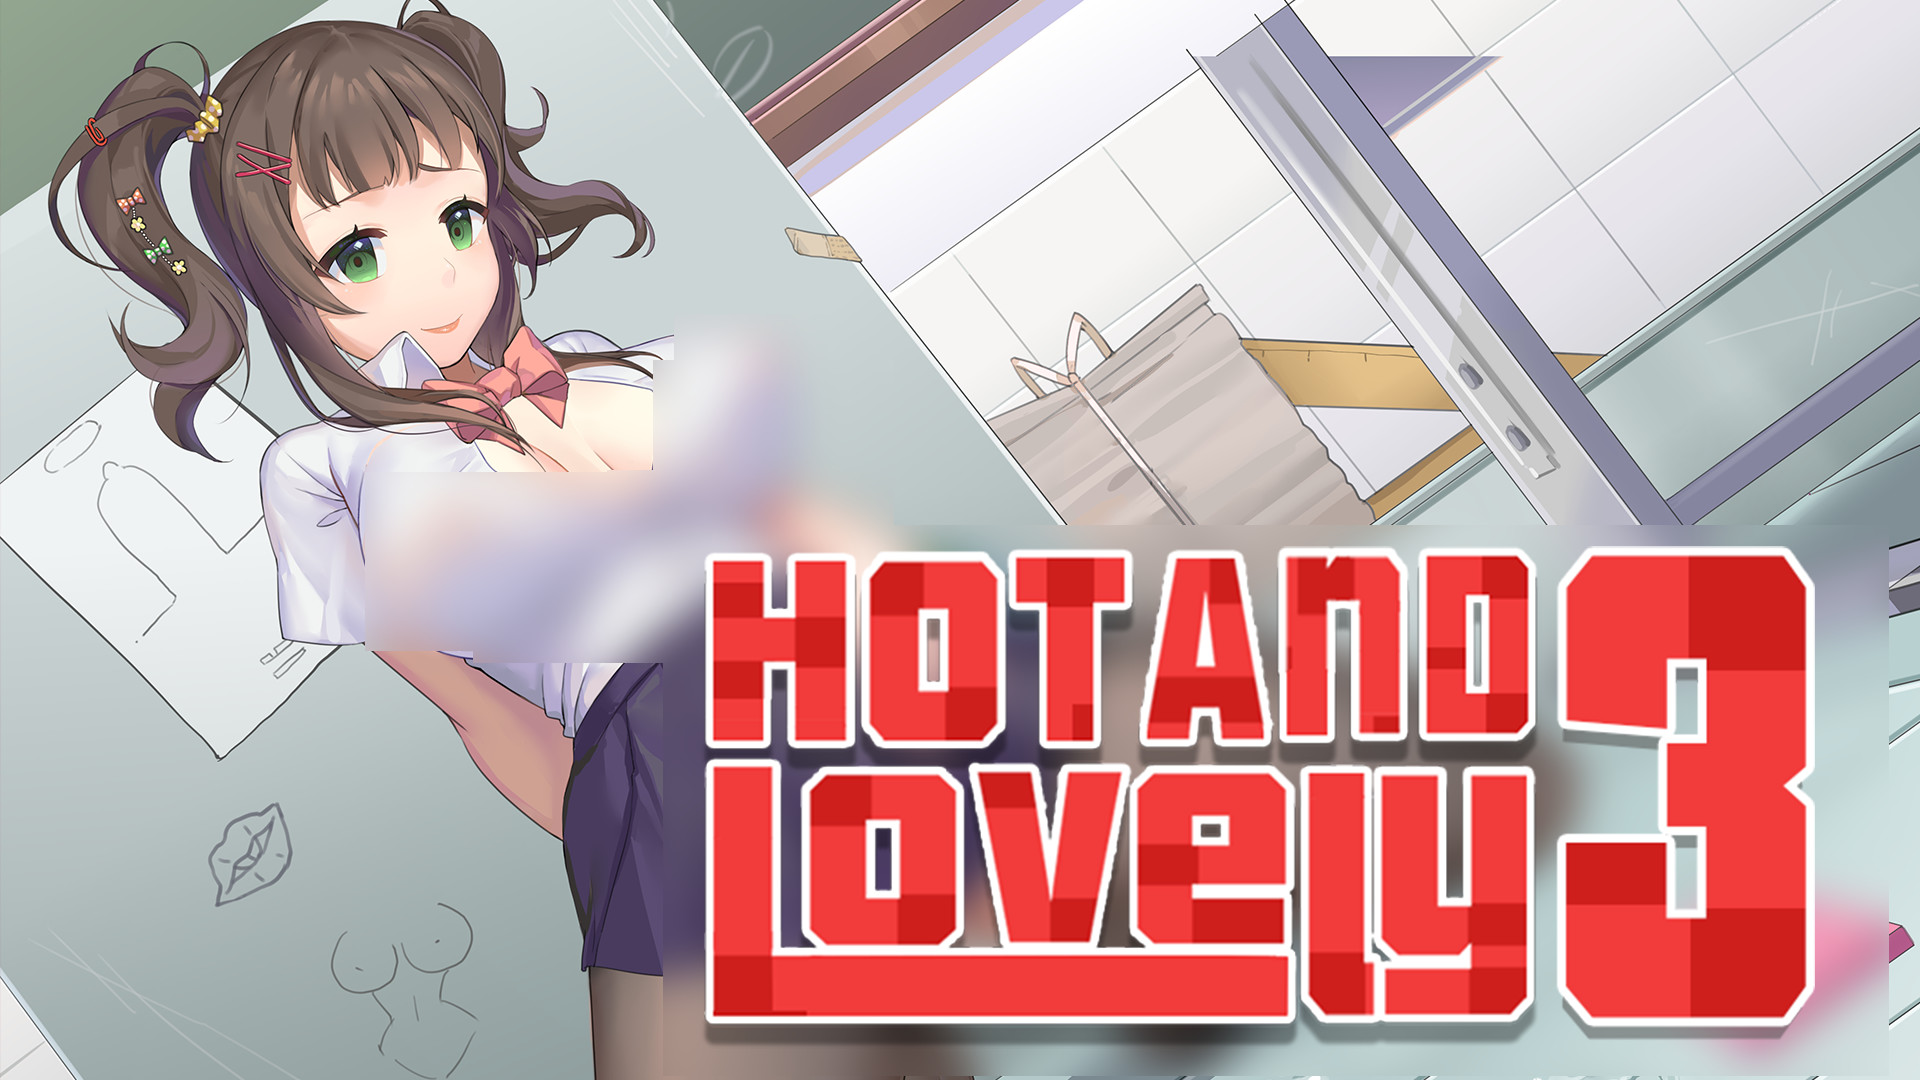 3 love game. Hot and Lovely игра. Цензура в играх. Love & Lies игра. Hot and Lovely ：Charm игра.